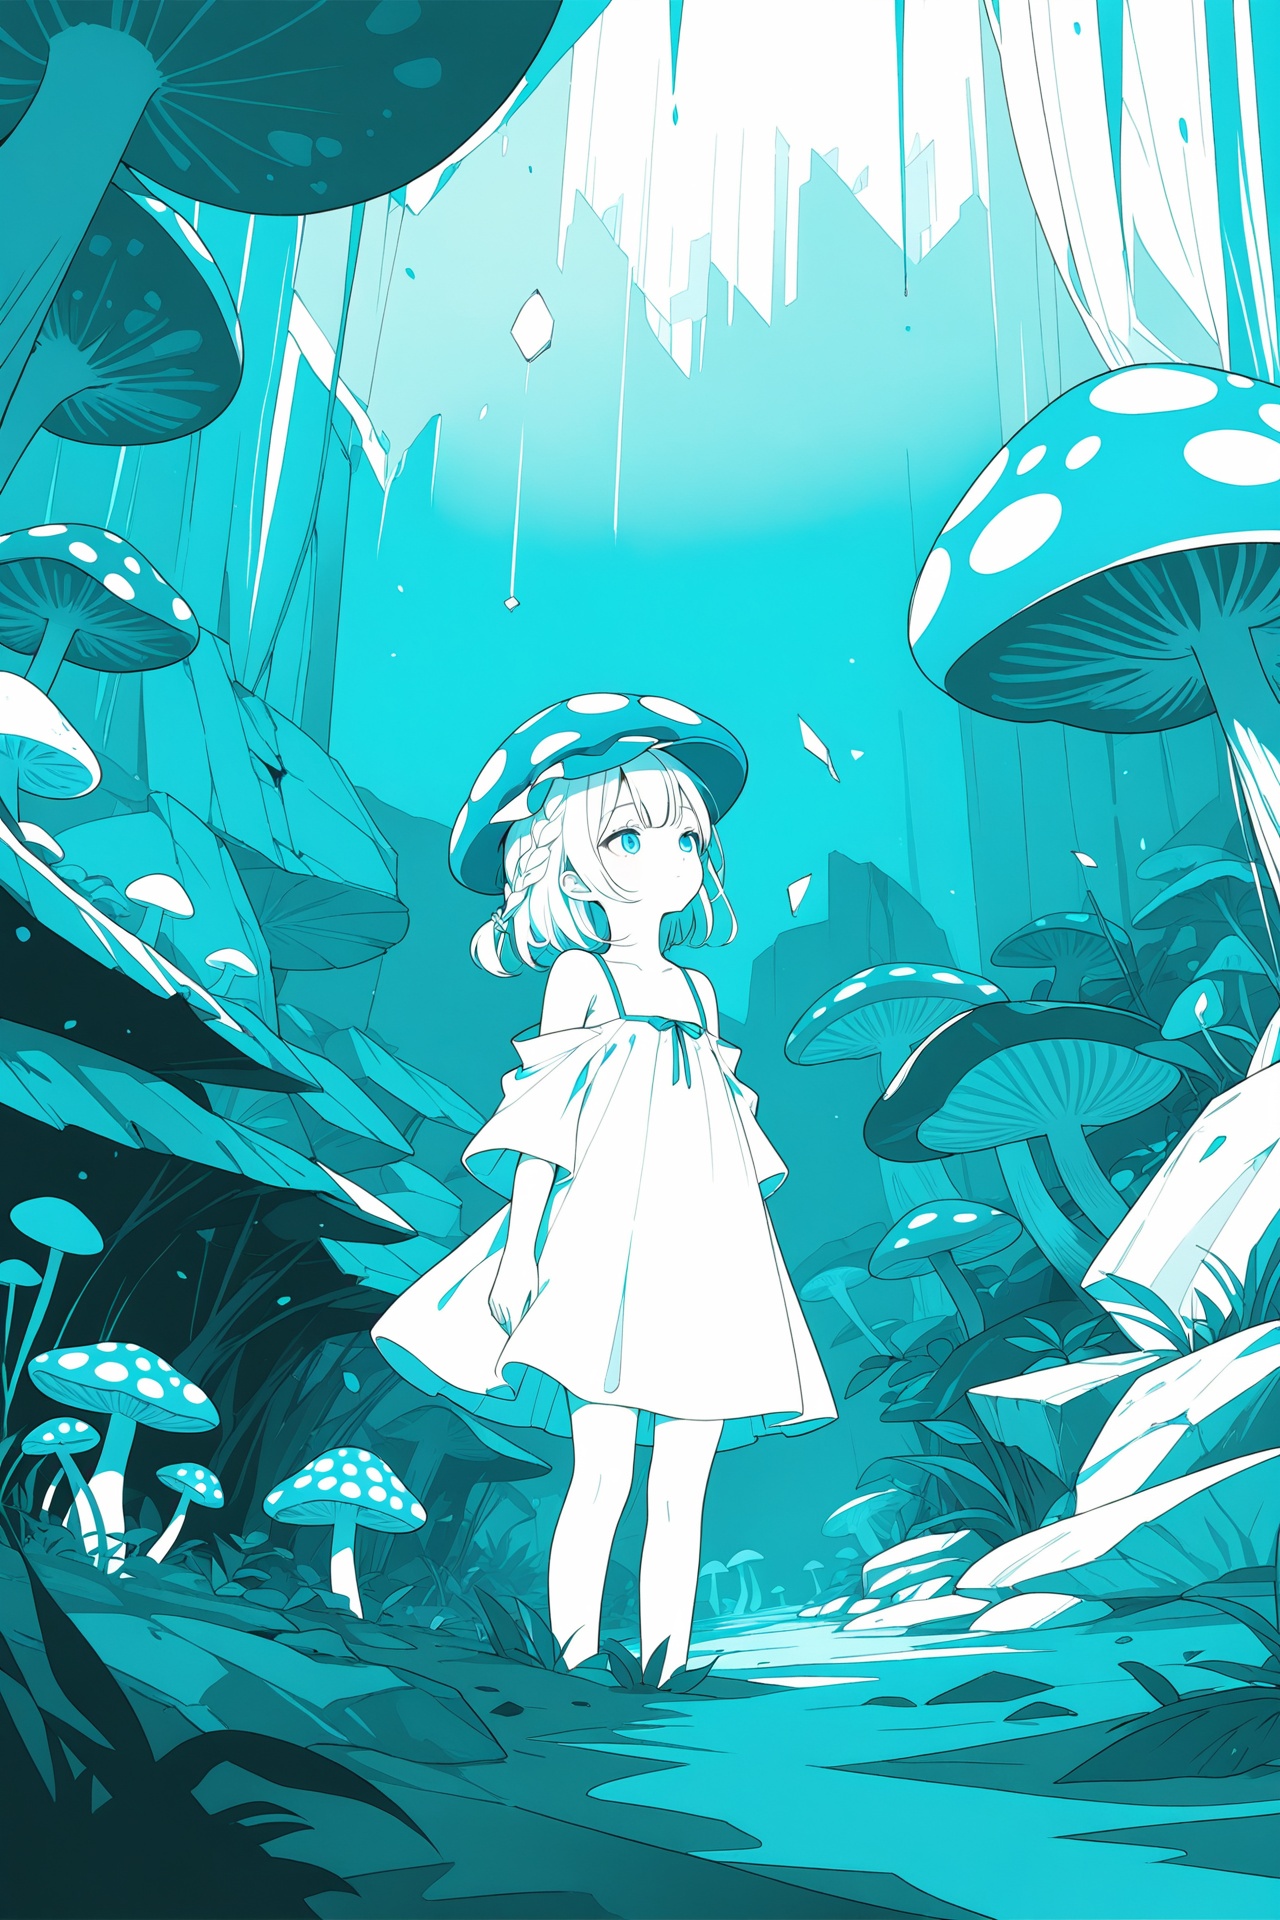 (masterpiece),(best quality),illustration,ultra detailed,hdr,Depth of field,(colorful),loli,1girl,bare shoulders,cold theme,broken glass,broken wall,aqua theme,white hair,blinking,white dress,closed mouth,constel lation,flat color,braid,blinking,white robe,float,closed mouth,constel lation,flat color,looking up,standing,medium hair,standing,solo,In the mushroom forest,wearing (mushroom hats:1.3),big mushroom hats,spotted mushroom hats,lots of white spots,